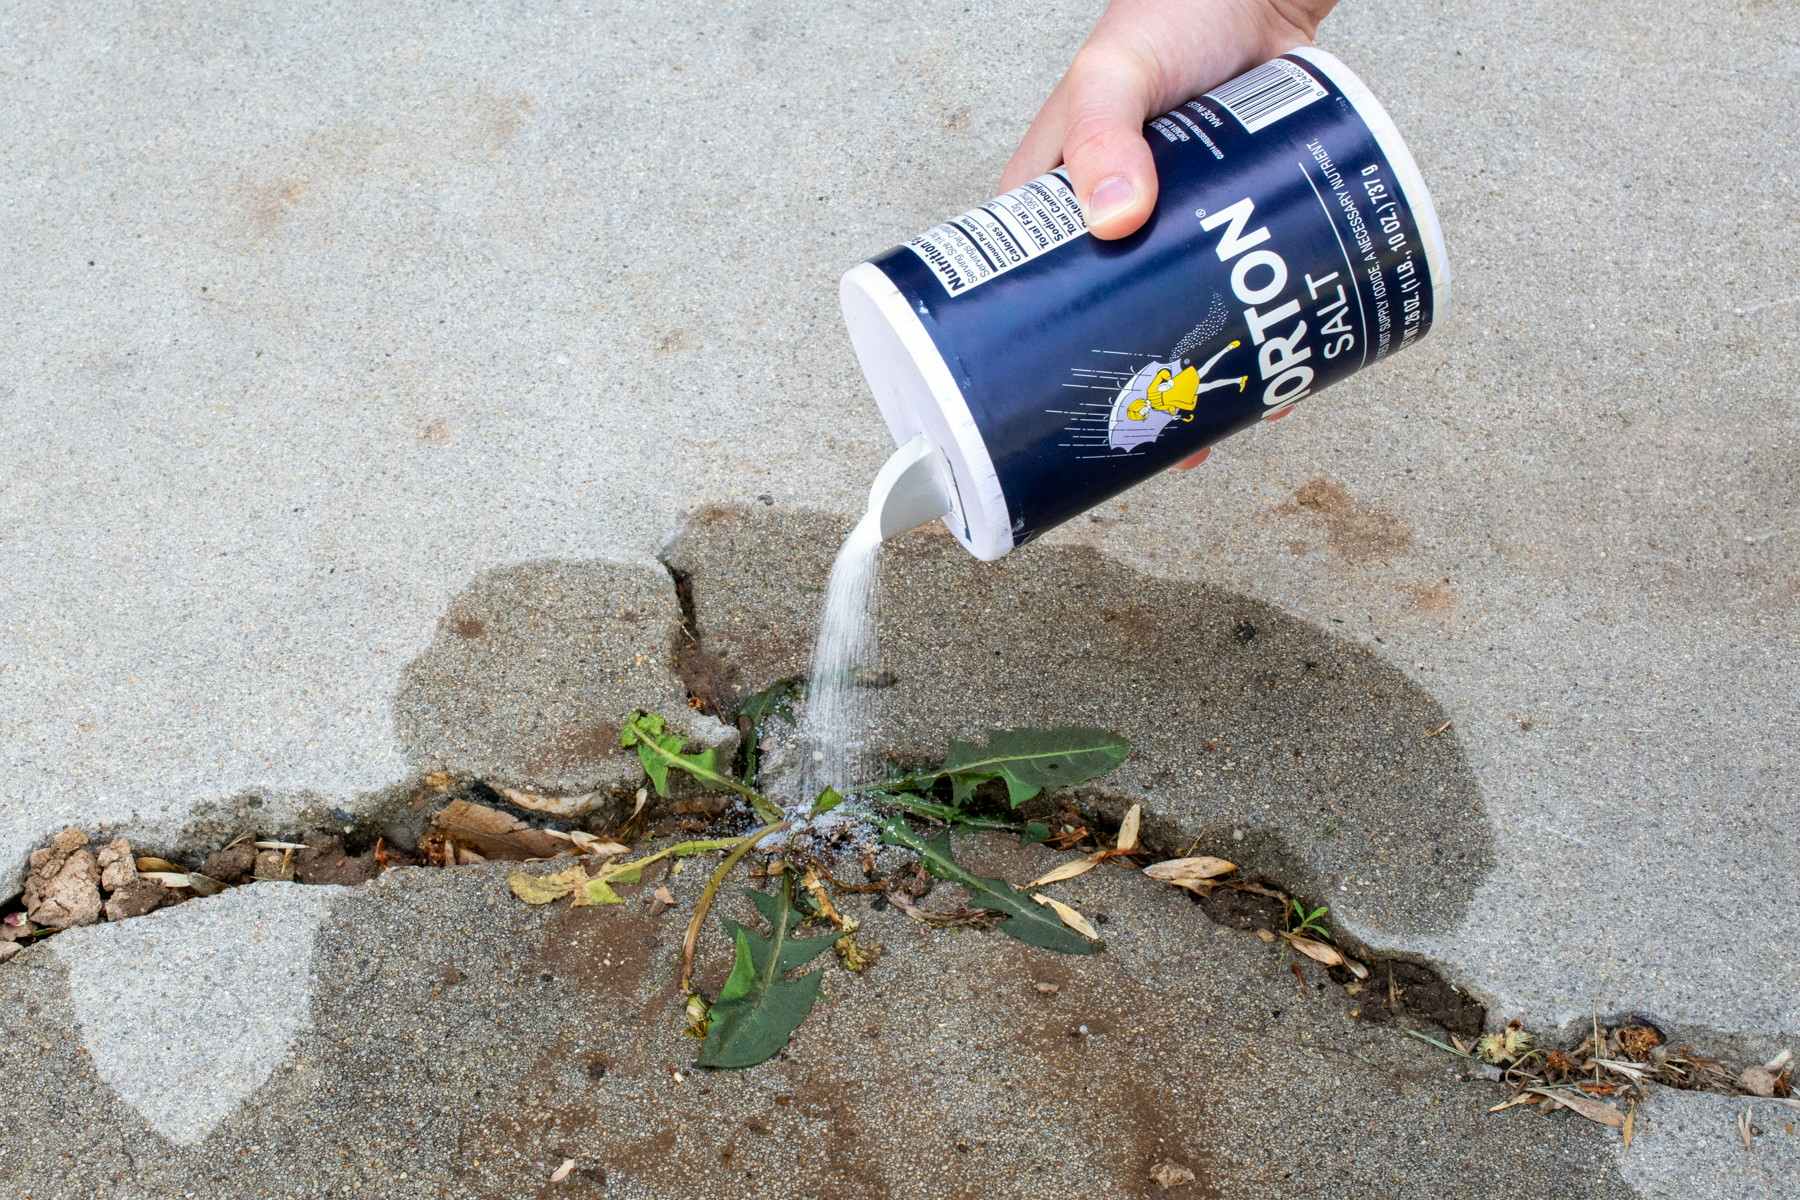 Someone pouring salt onto a sidewalk crack as a weed killer